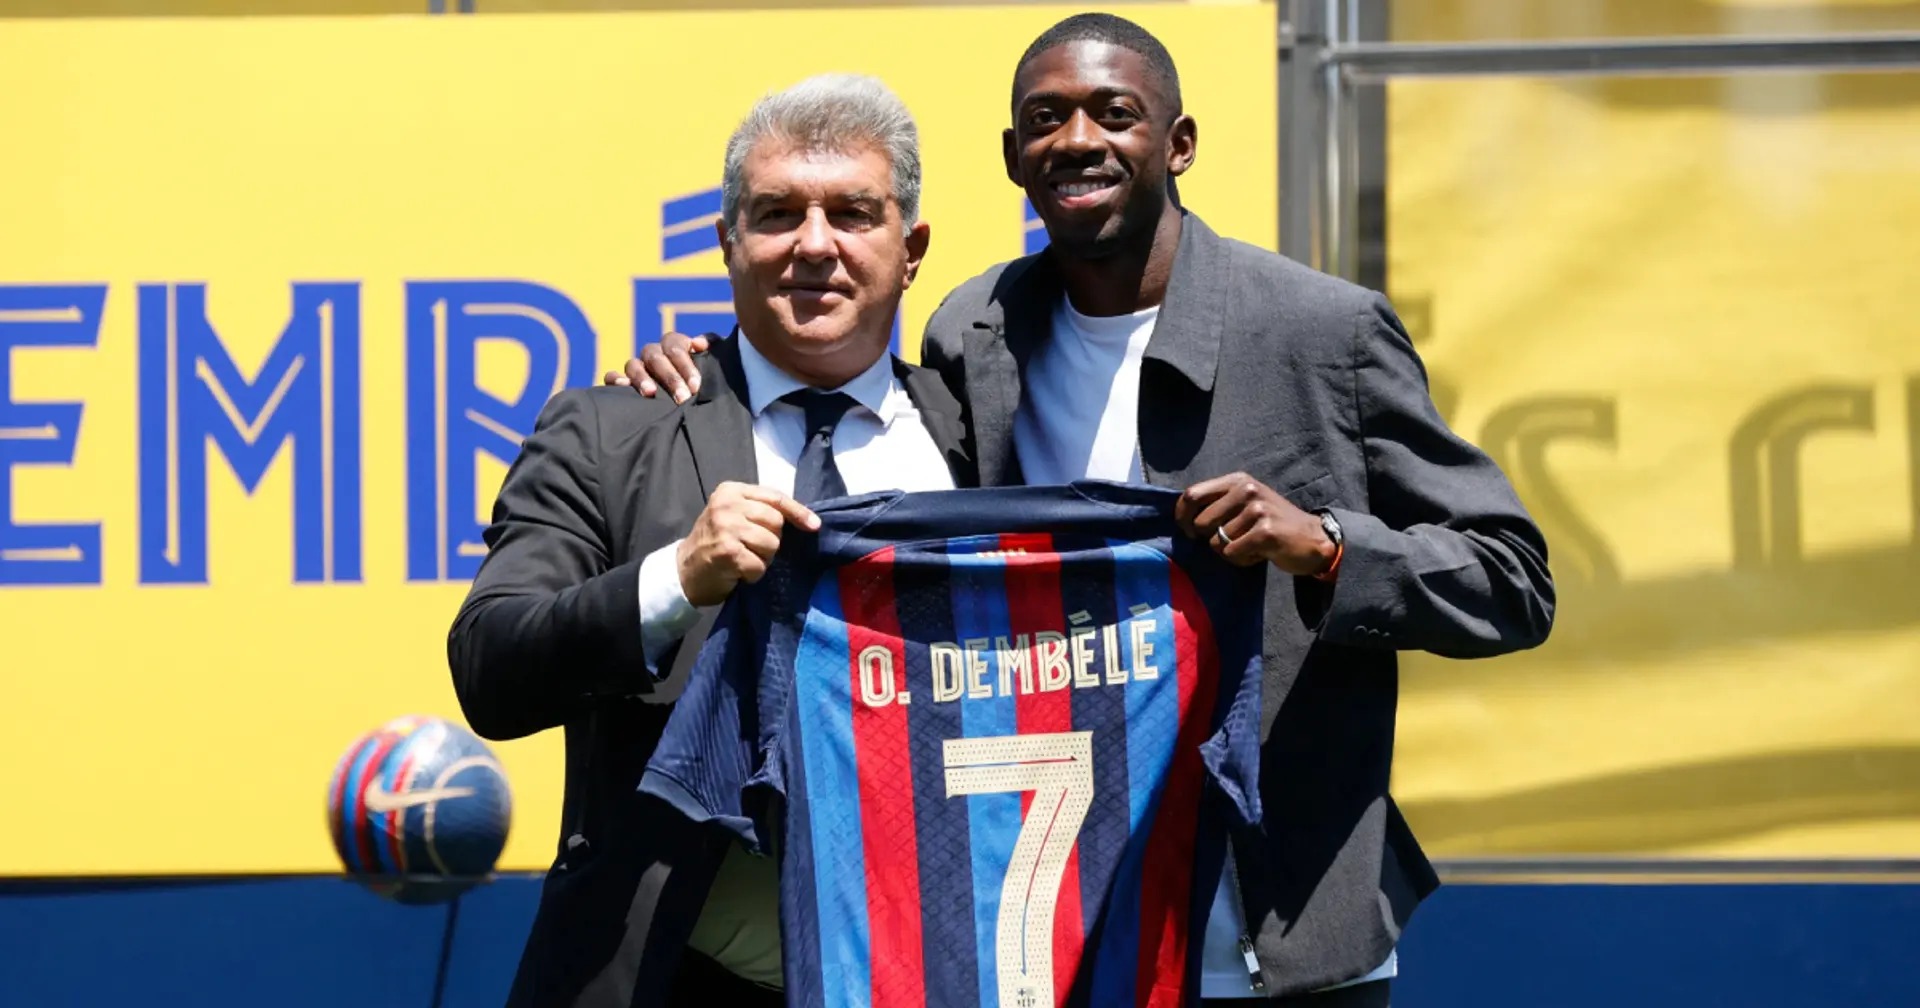 Ousmane Dembele's new Barcelona contract sees his wages reduced by 40%